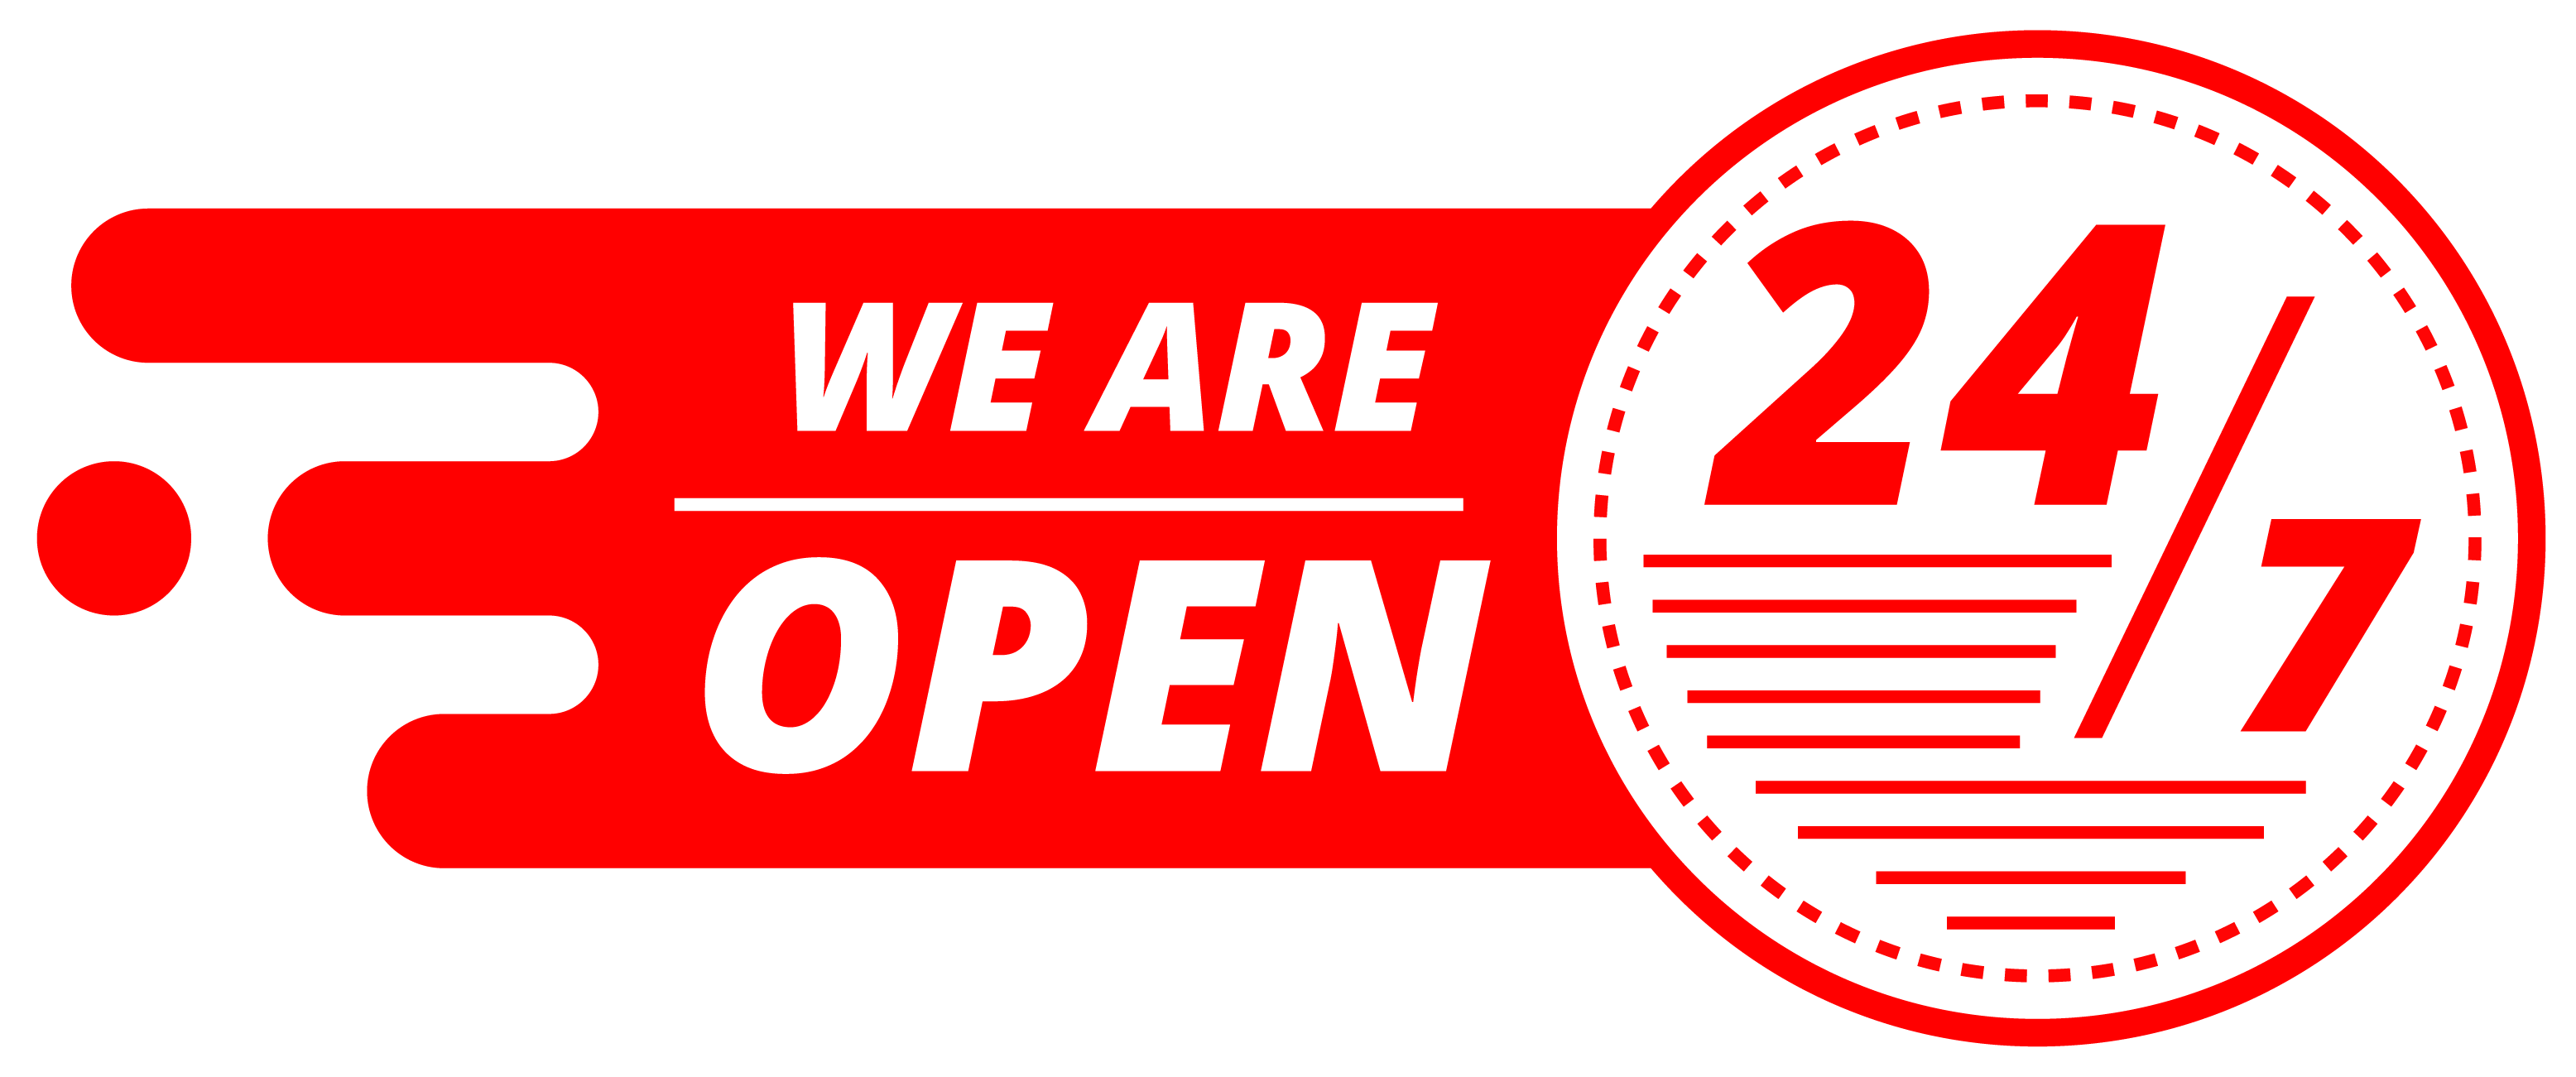 we are open 24/7